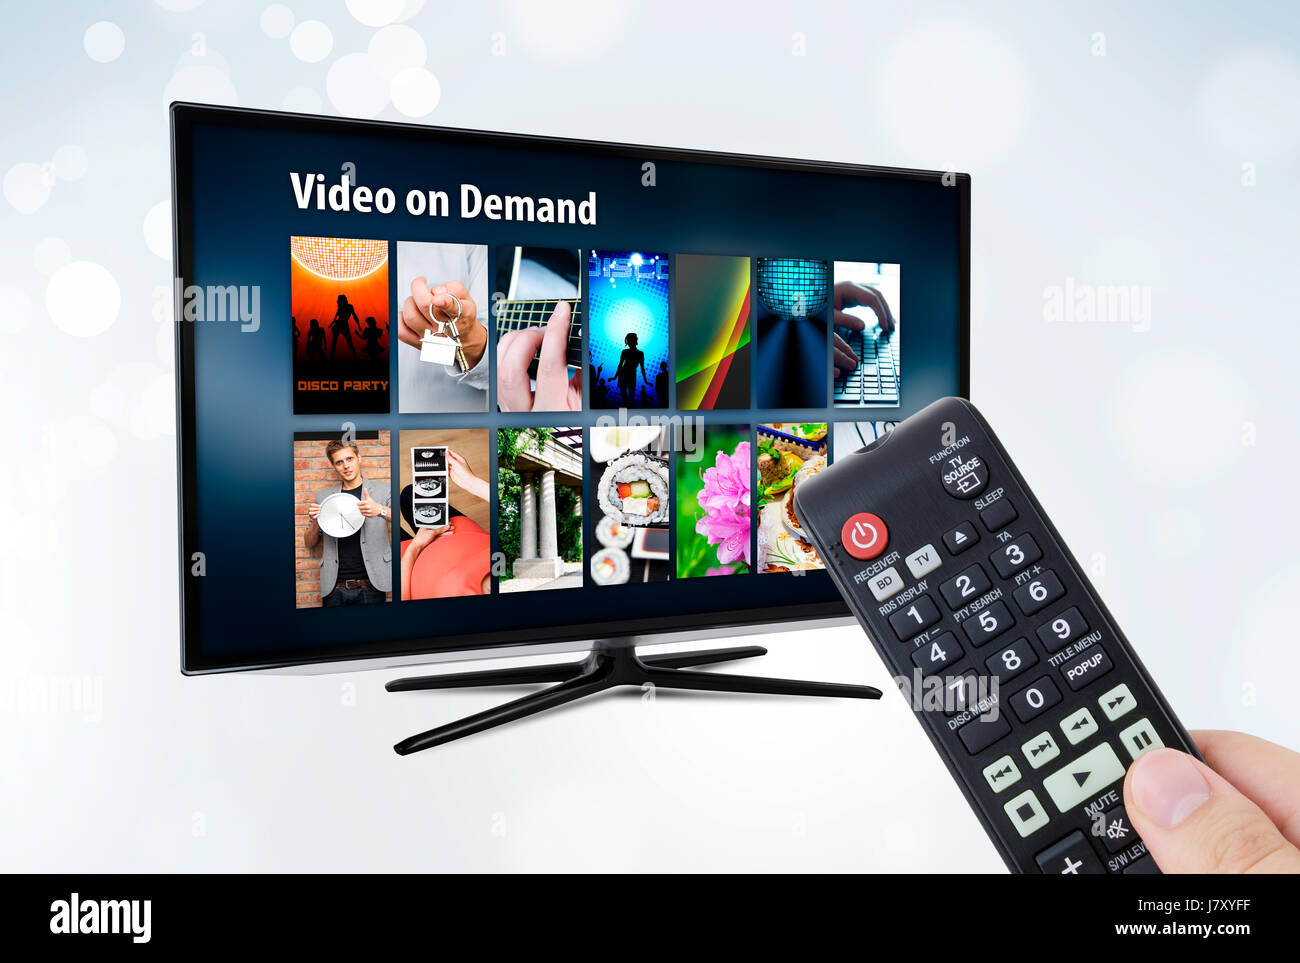 Video on demand VOD application or service on smart TV Stock Photo